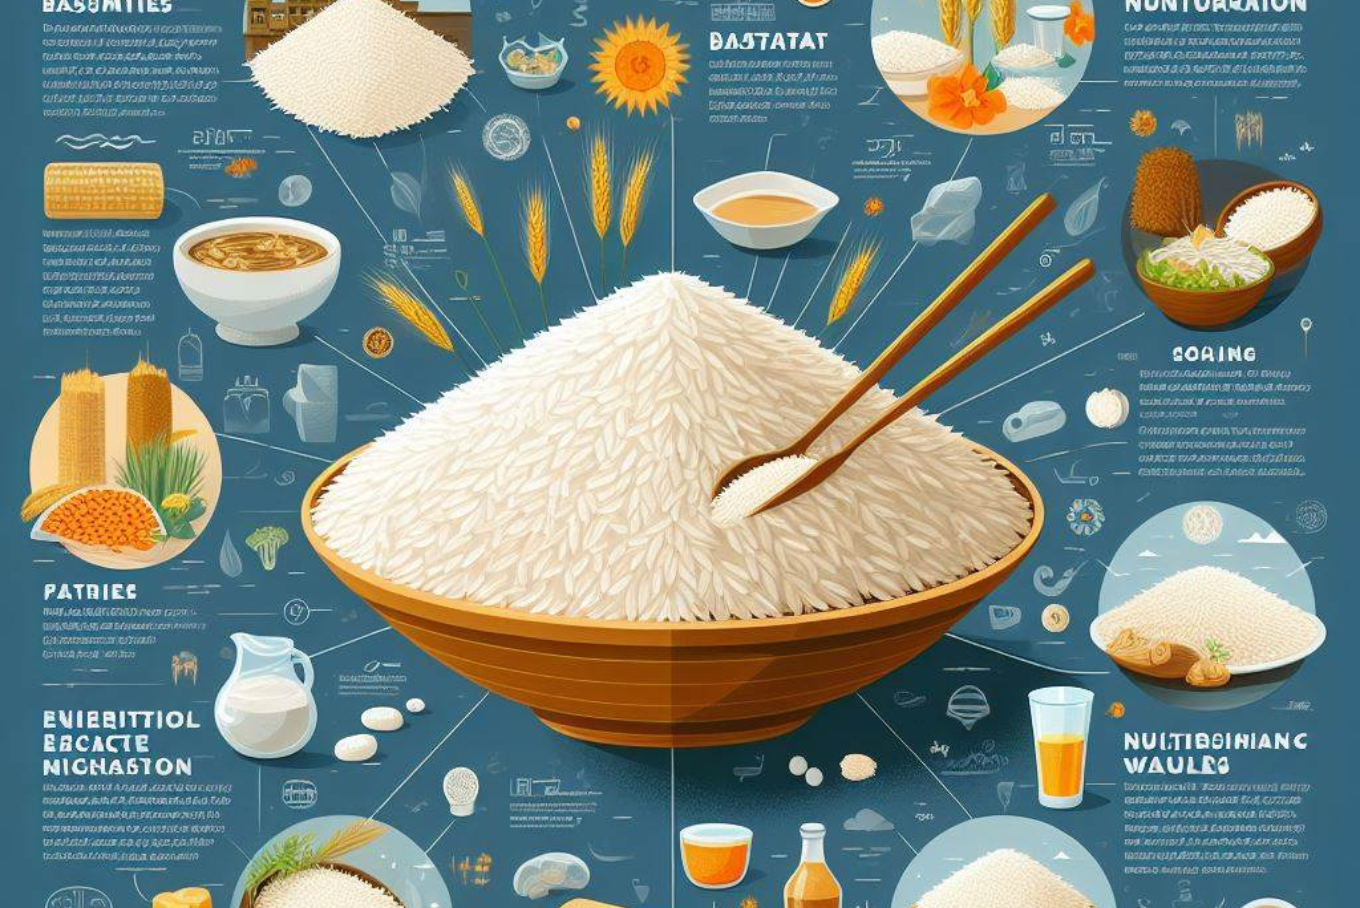 Unraveling The Mystique: Myths and Facts About Basmati Rice